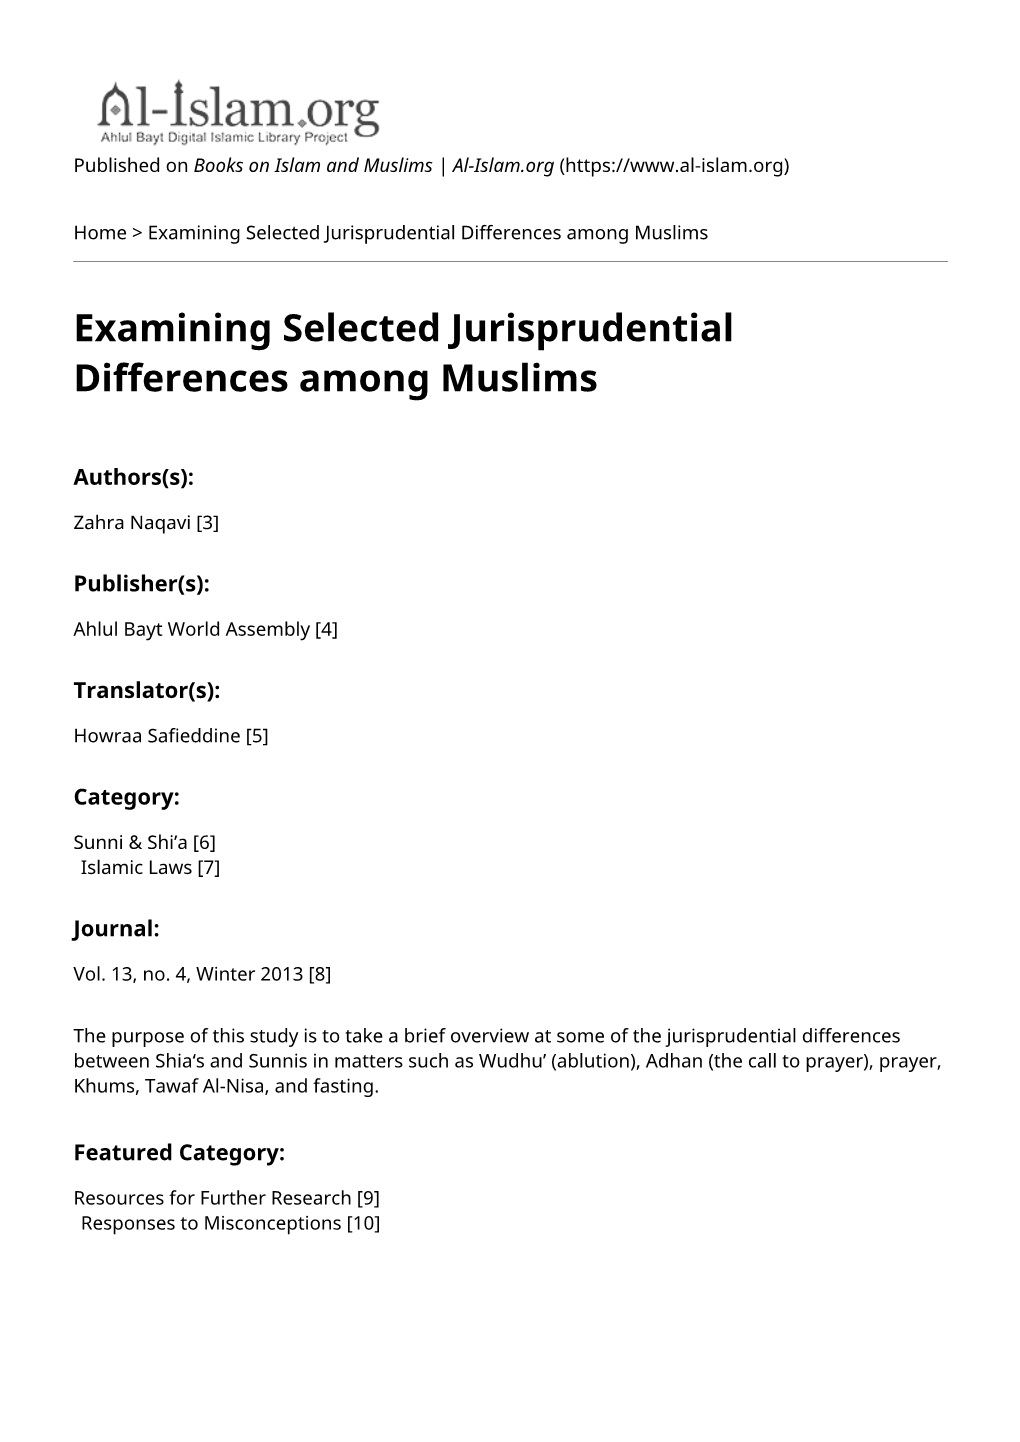 Examining Selected Jurisprudential Differences Among Muslims